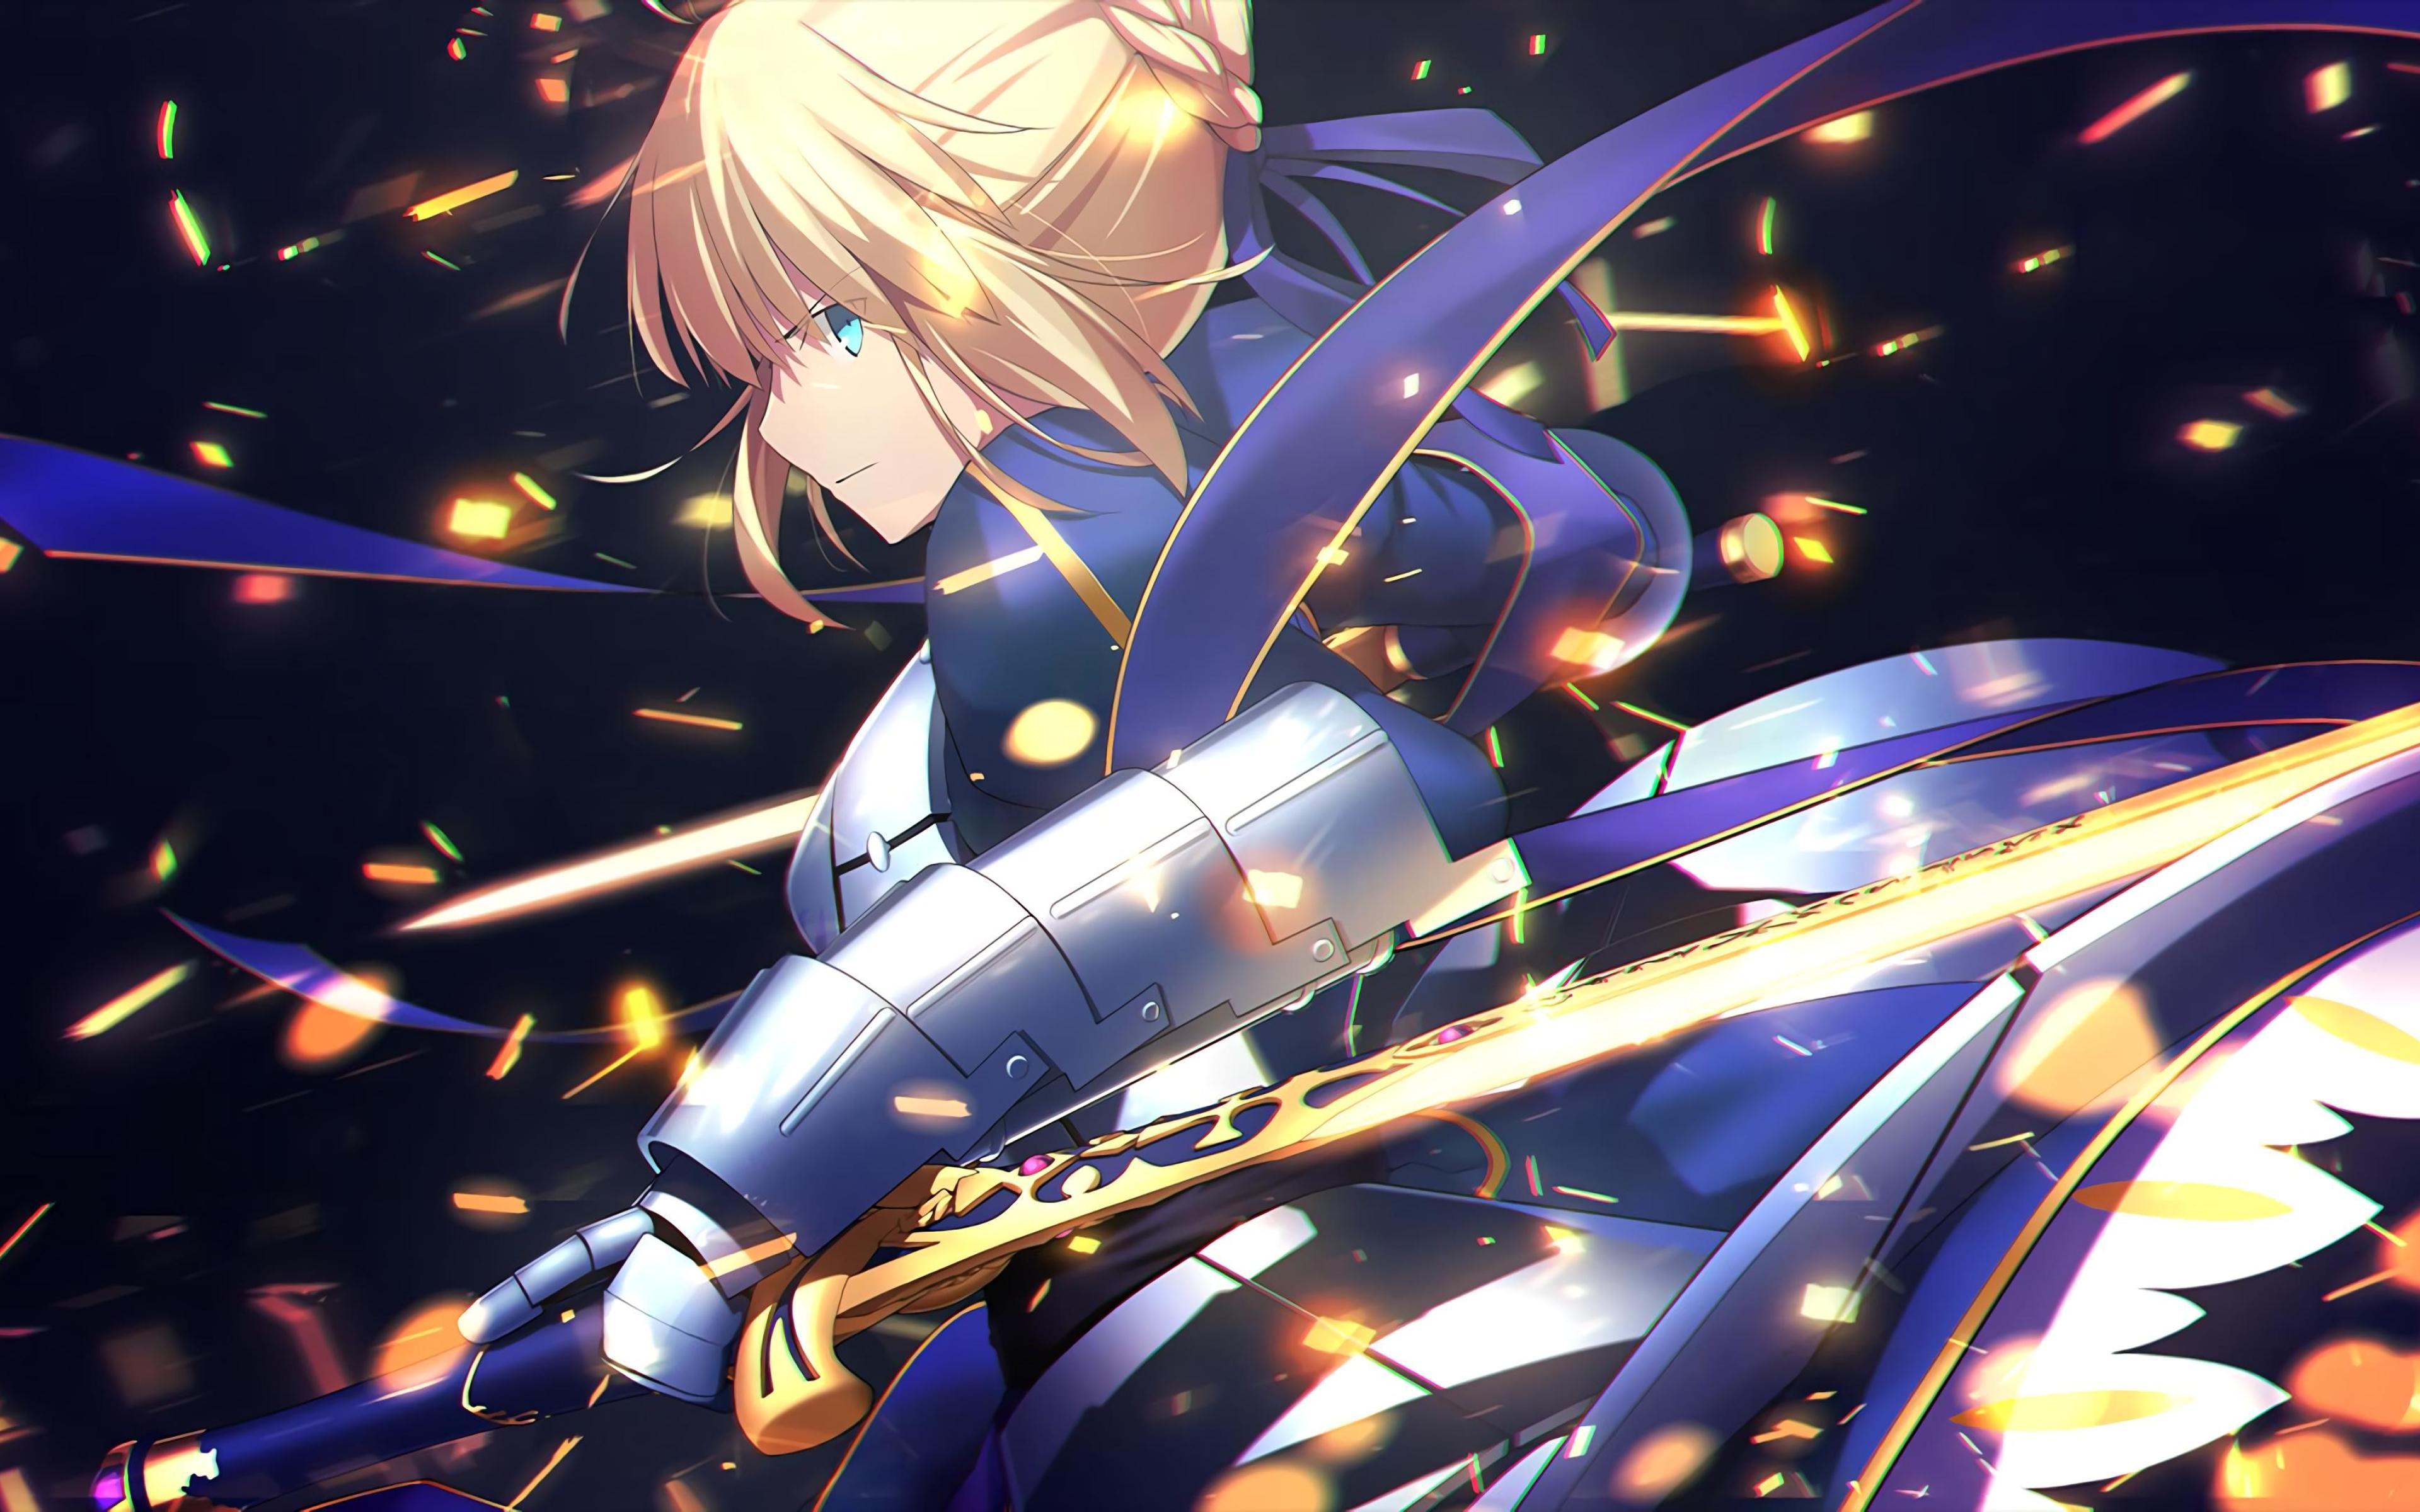 Download Wallpaper Artoria Pendragon, Fate Stay Night, Saber, Manga, Alter, TYPE MOON, Fate Series For Desktop With Resolution 3840x2400. High Quality HD Picture Wallpaper